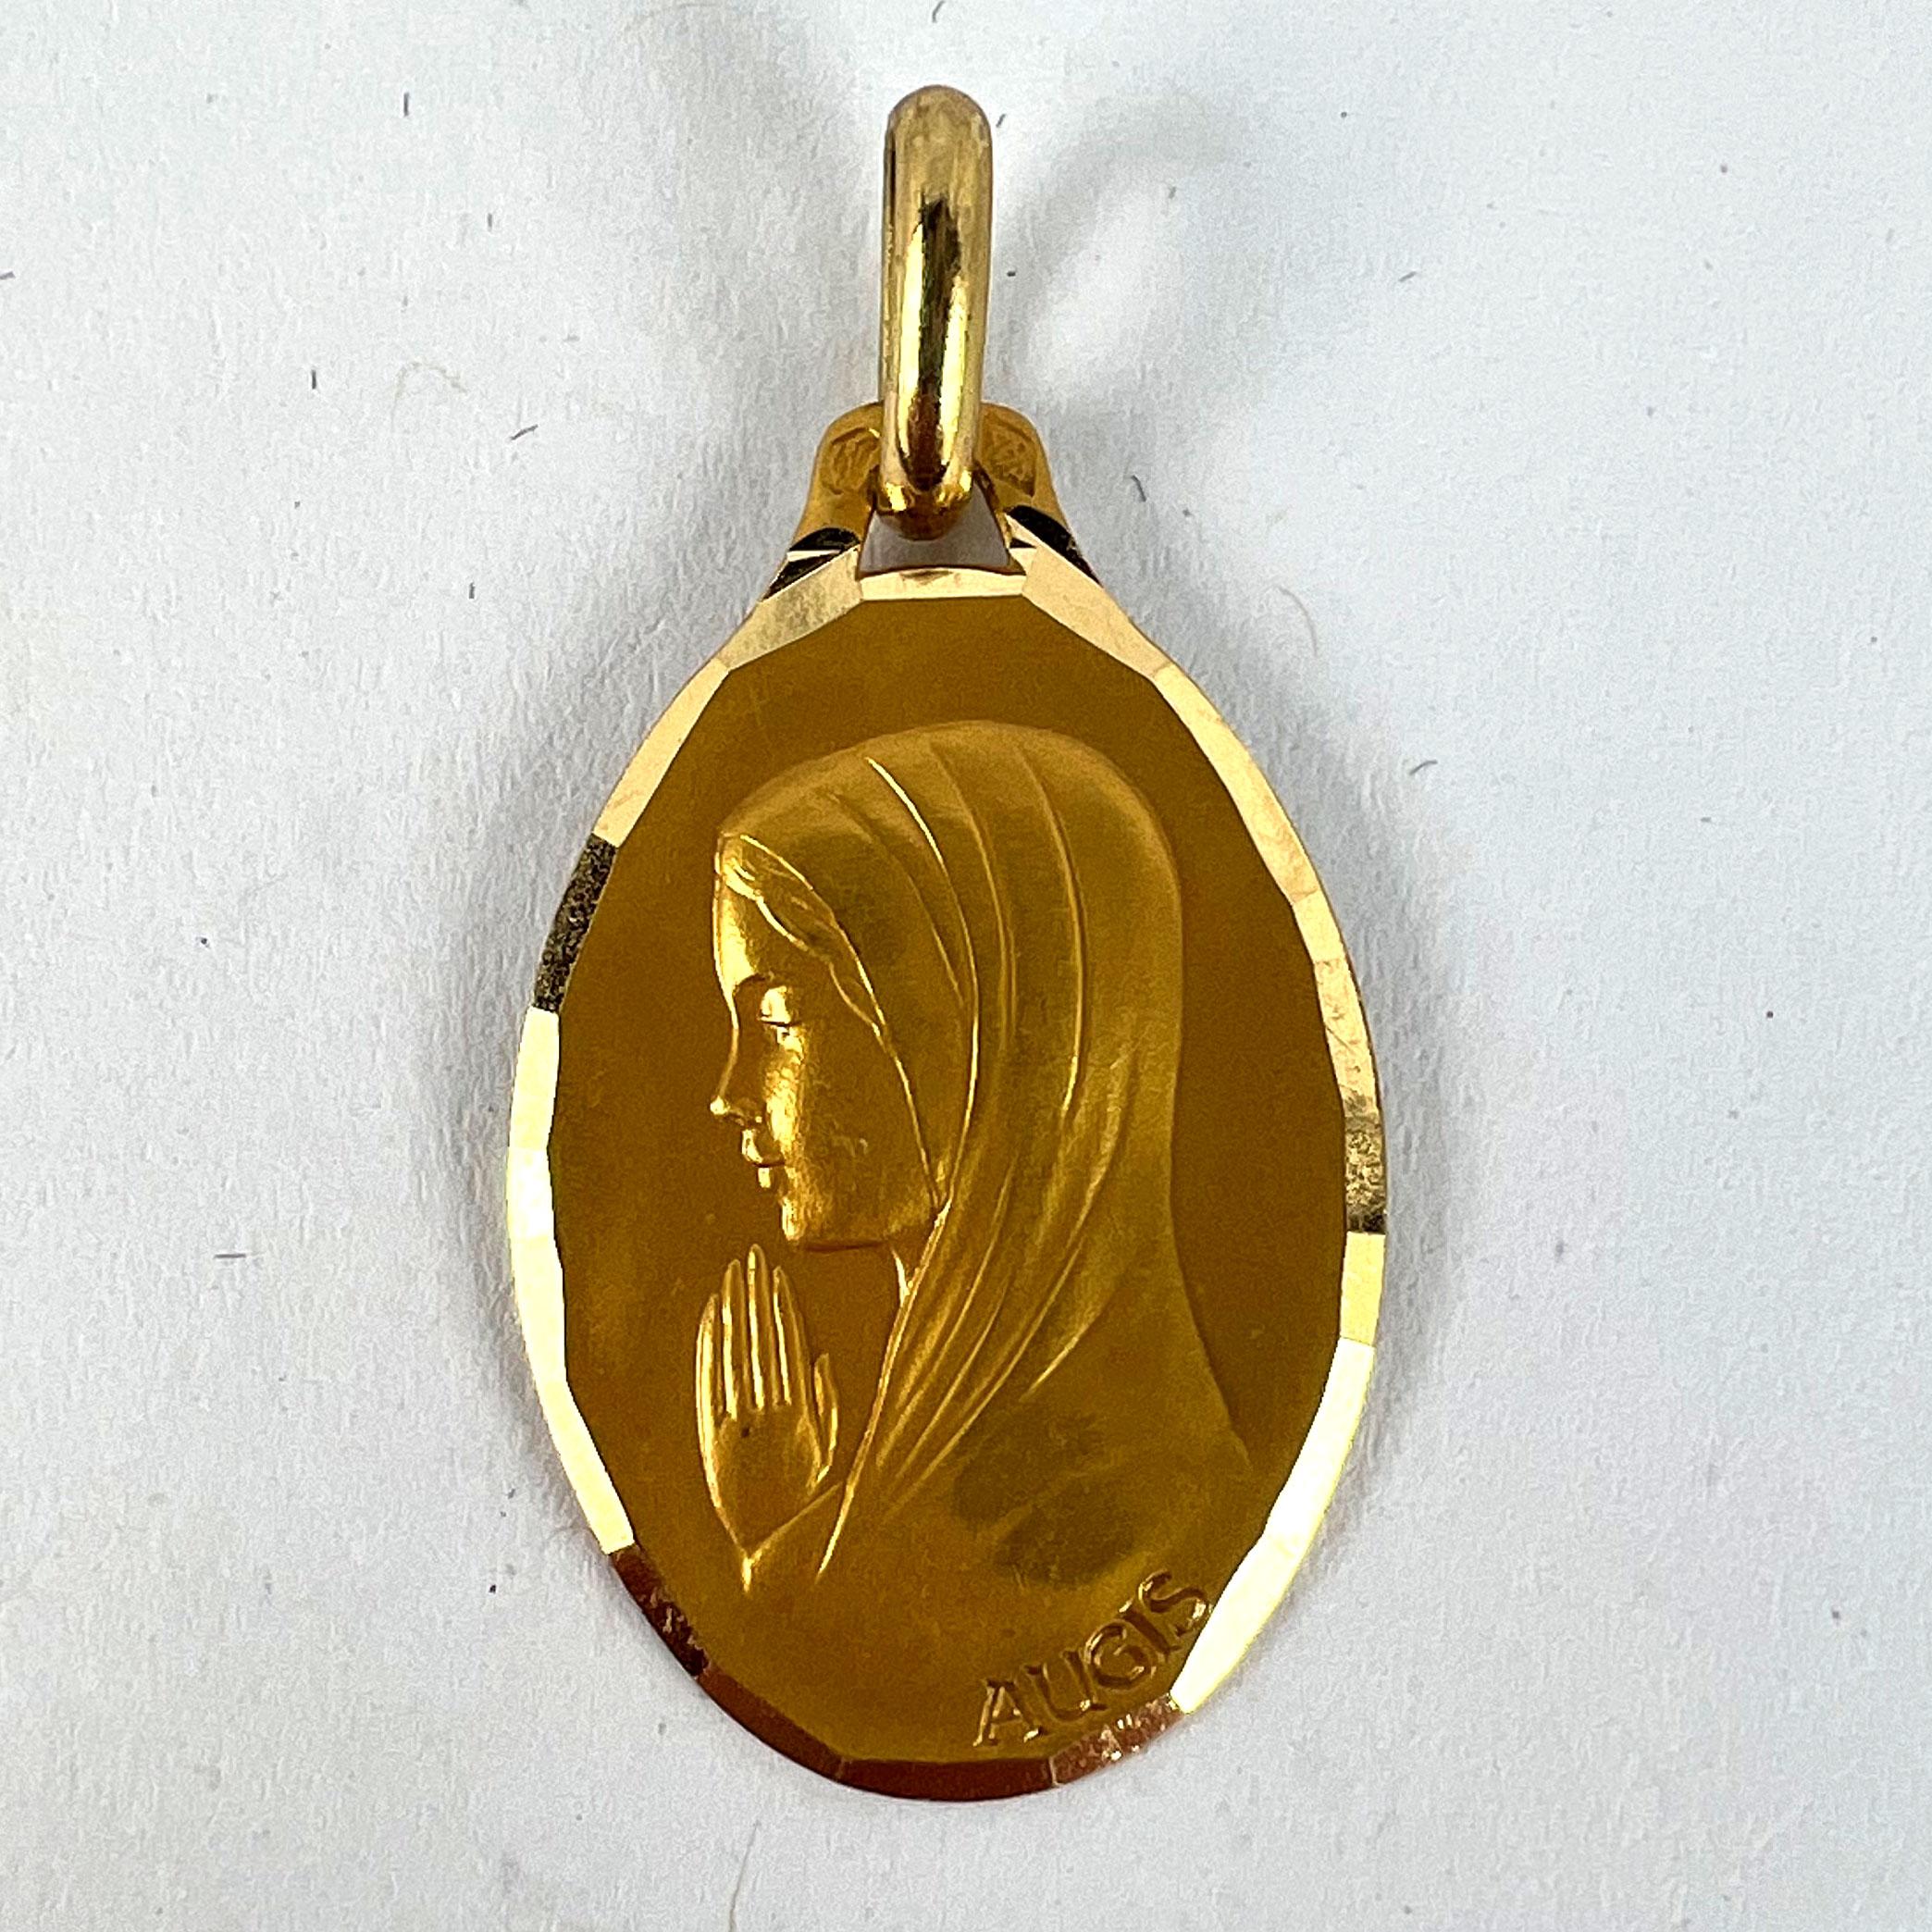 French Augis Virgin Mary 18K Yellow Gold Medal Pendant For Sale 7